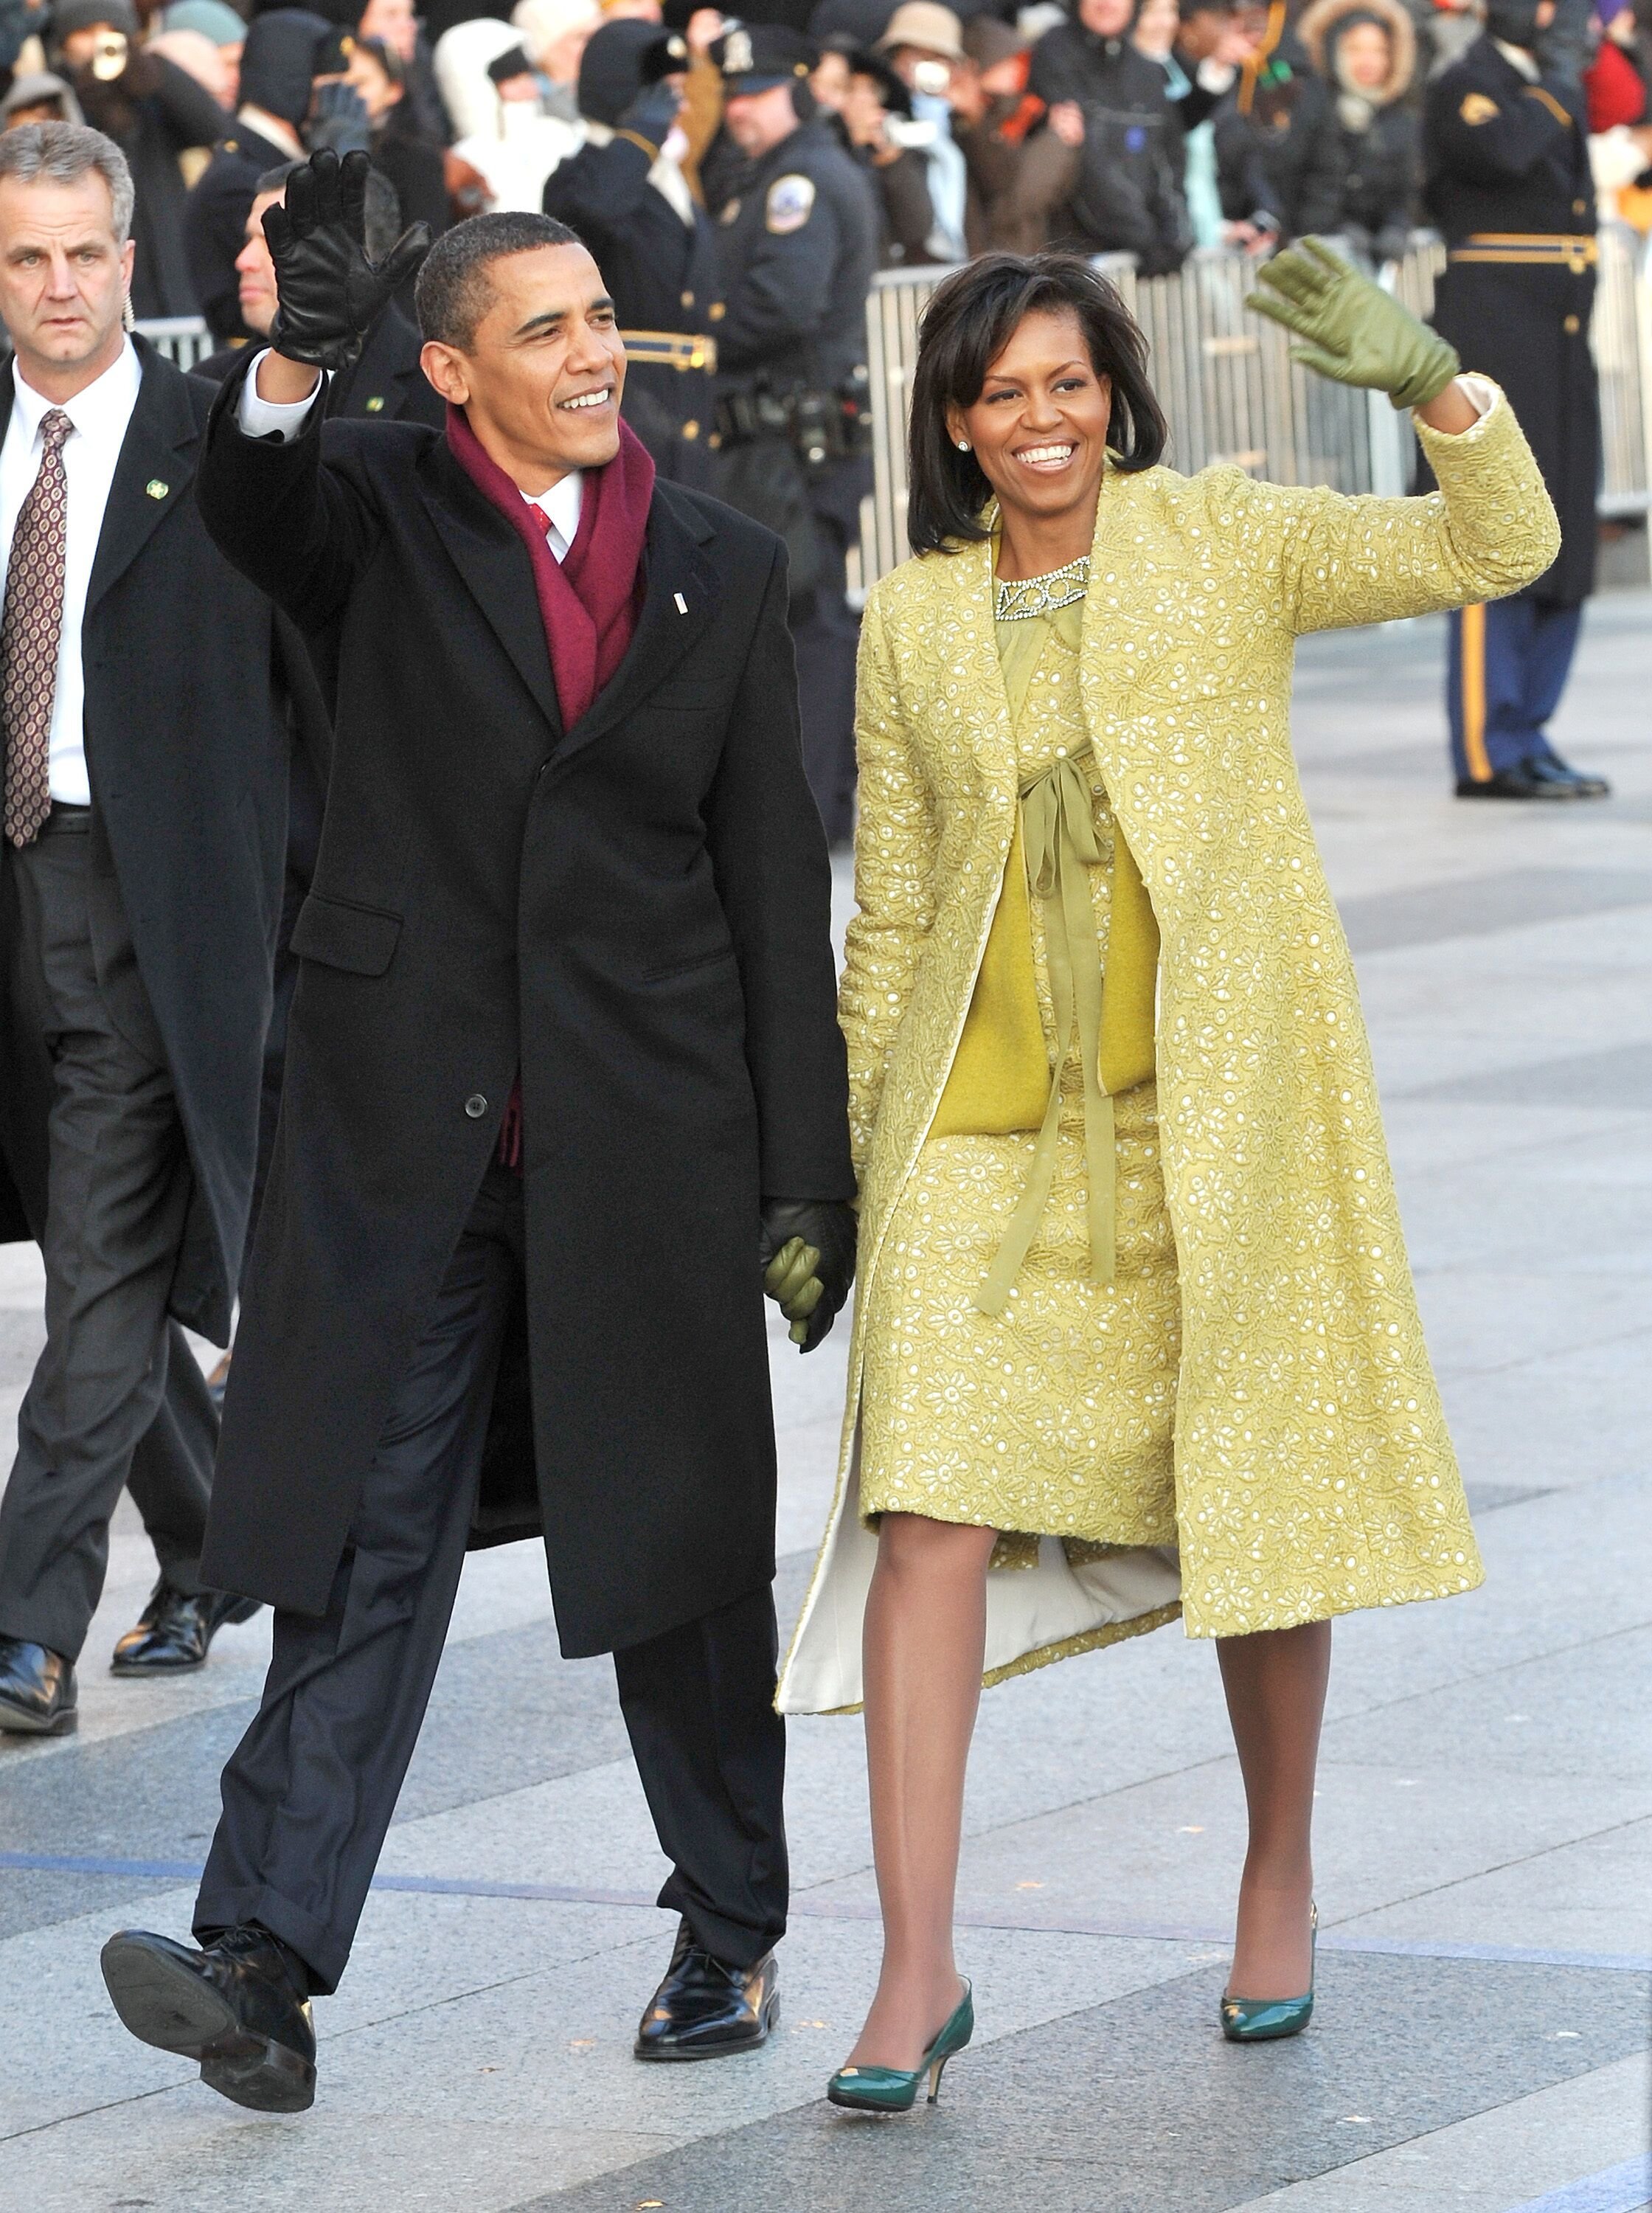 Barack Obama and first lady Michelle Obama walk in the Inaugural Parade. | Source: Getty Images